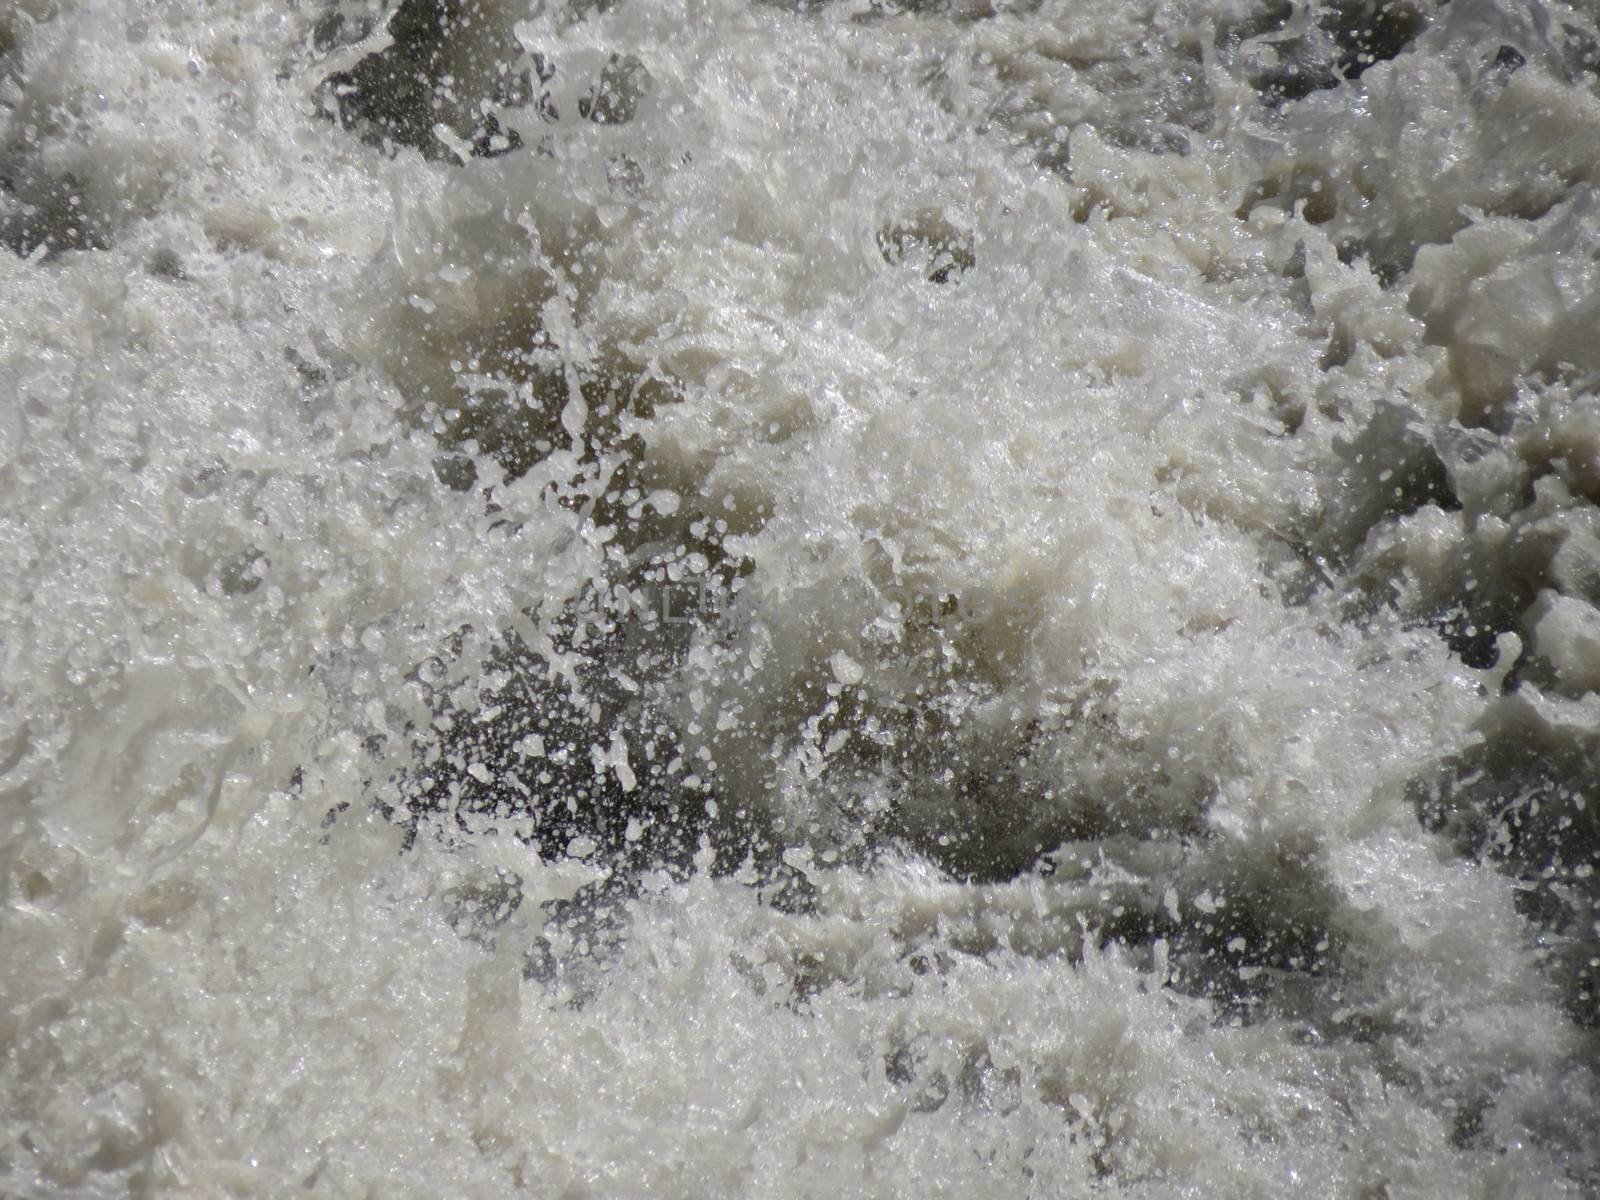 troubled water in a river - detail